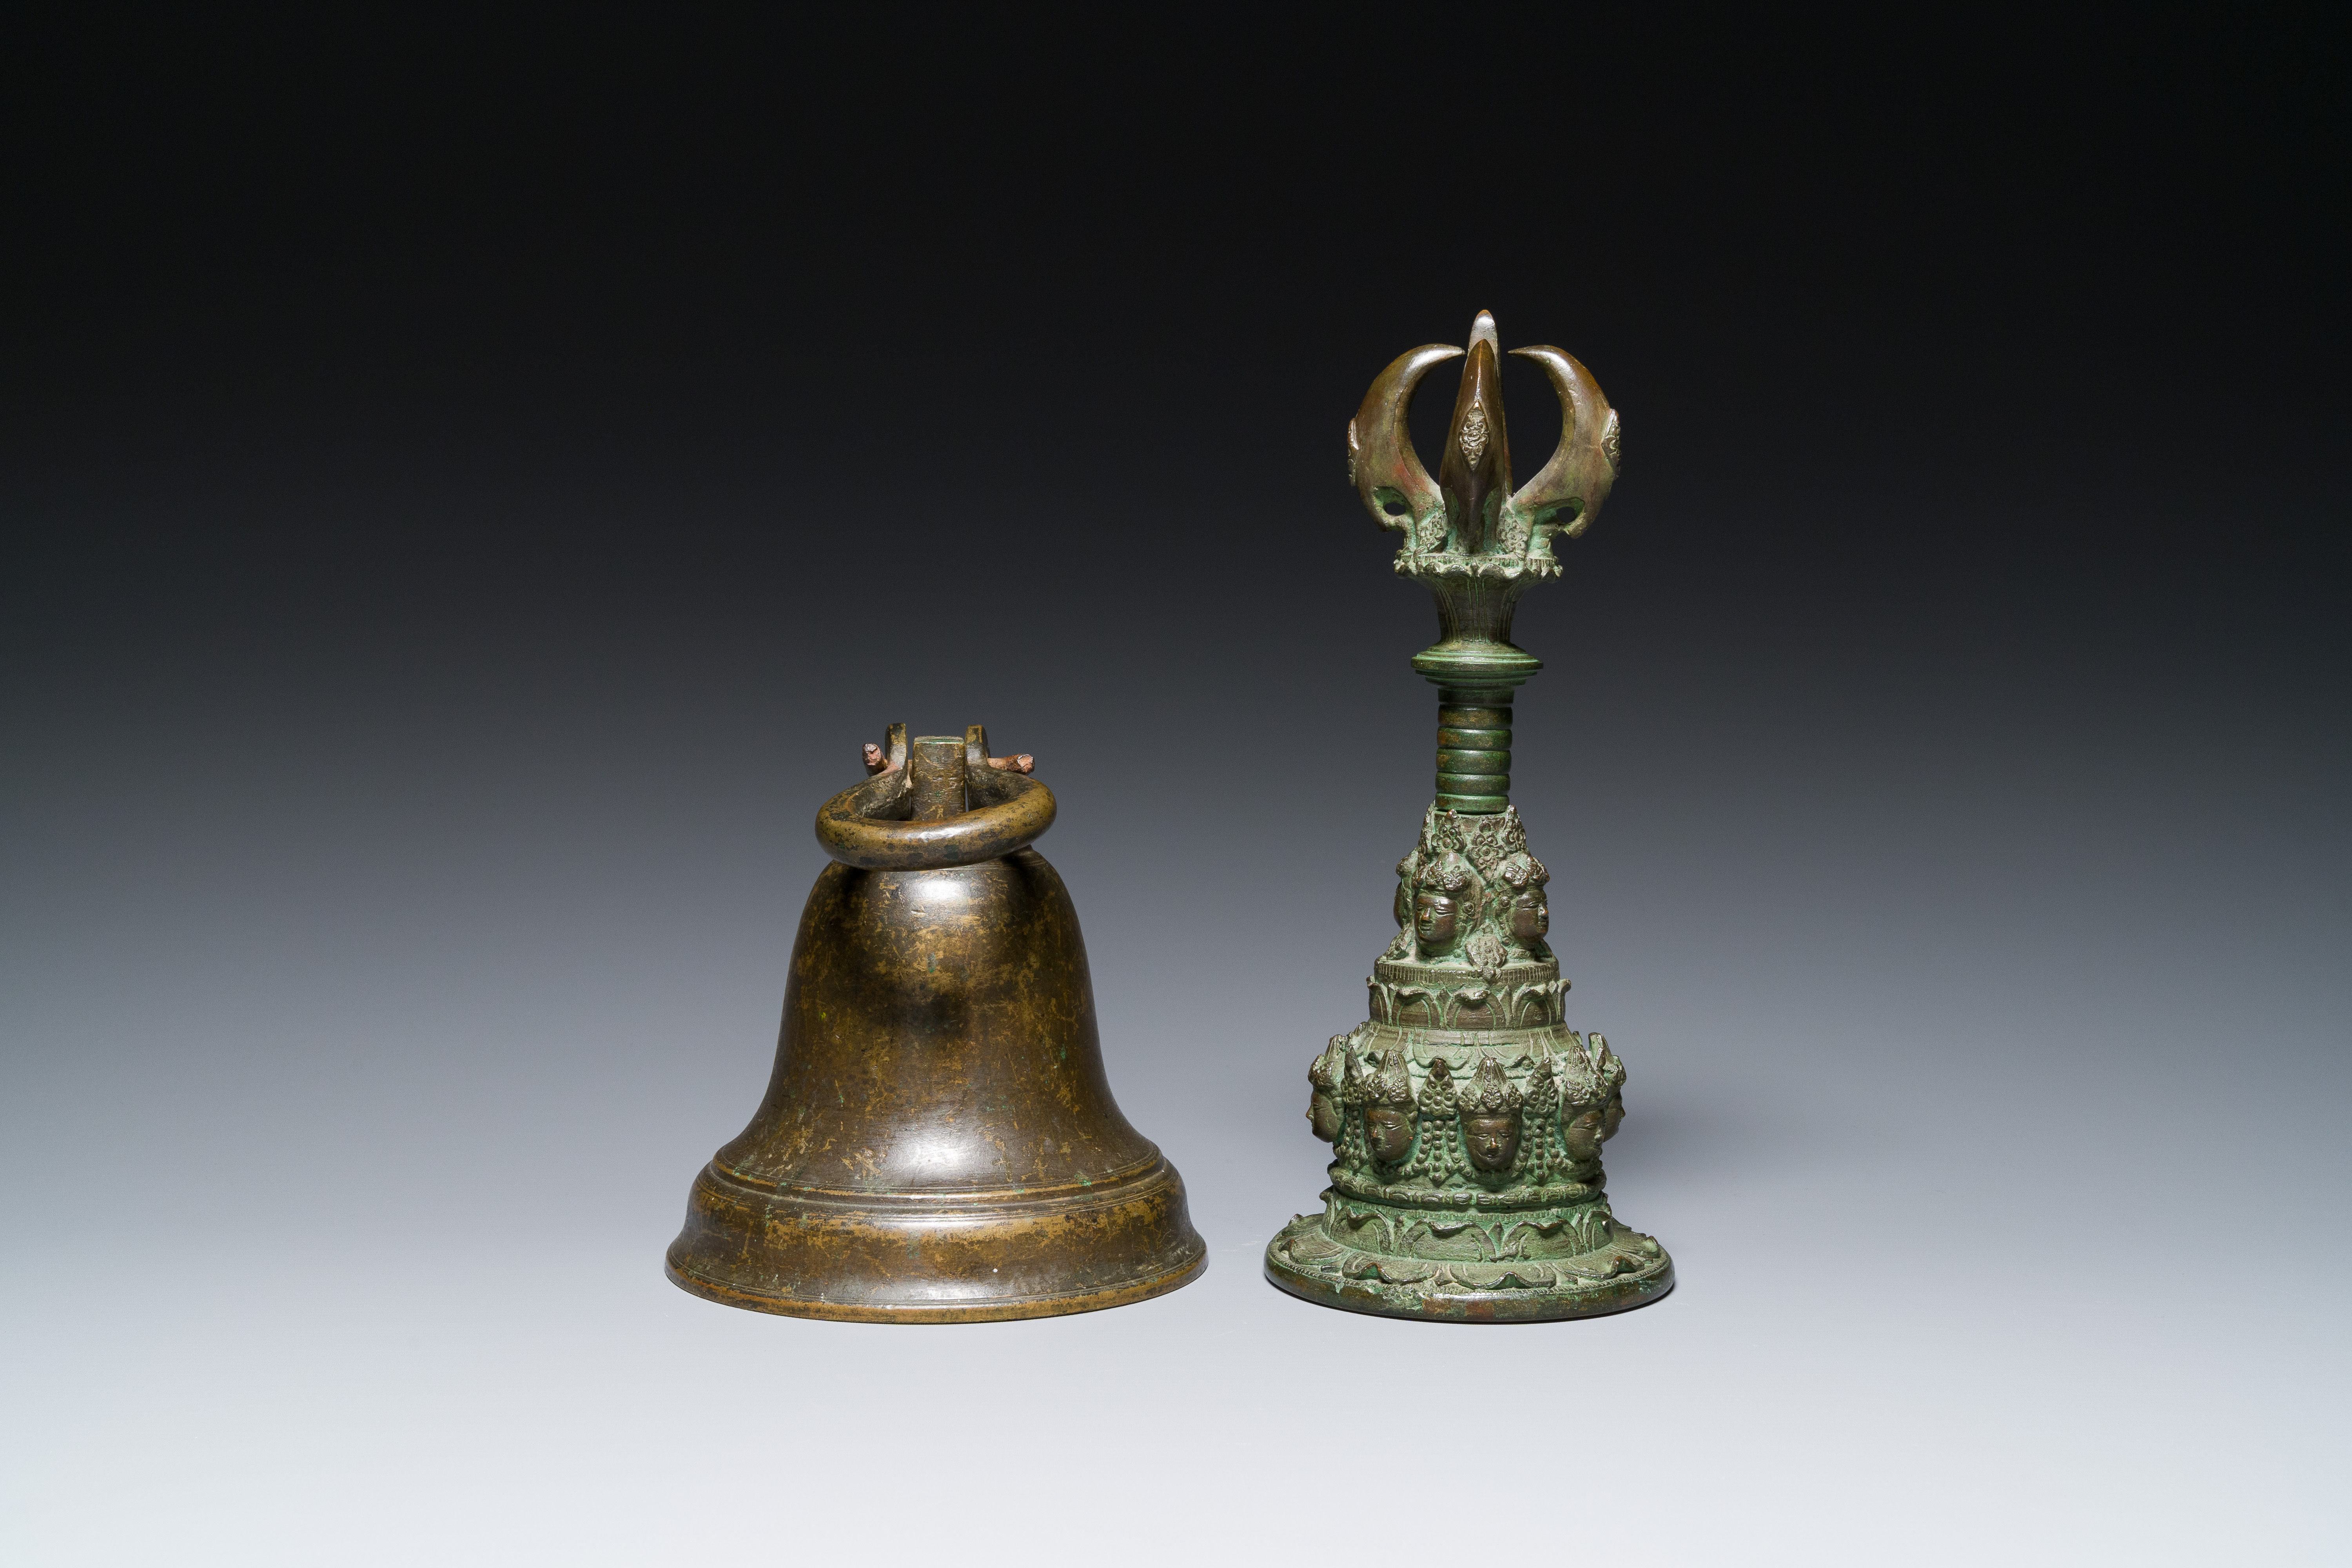 A bronze bell and a ceremonial hand bell, South Asia and Southeast Asia, 19th C. or earlier - Image 11 of 21